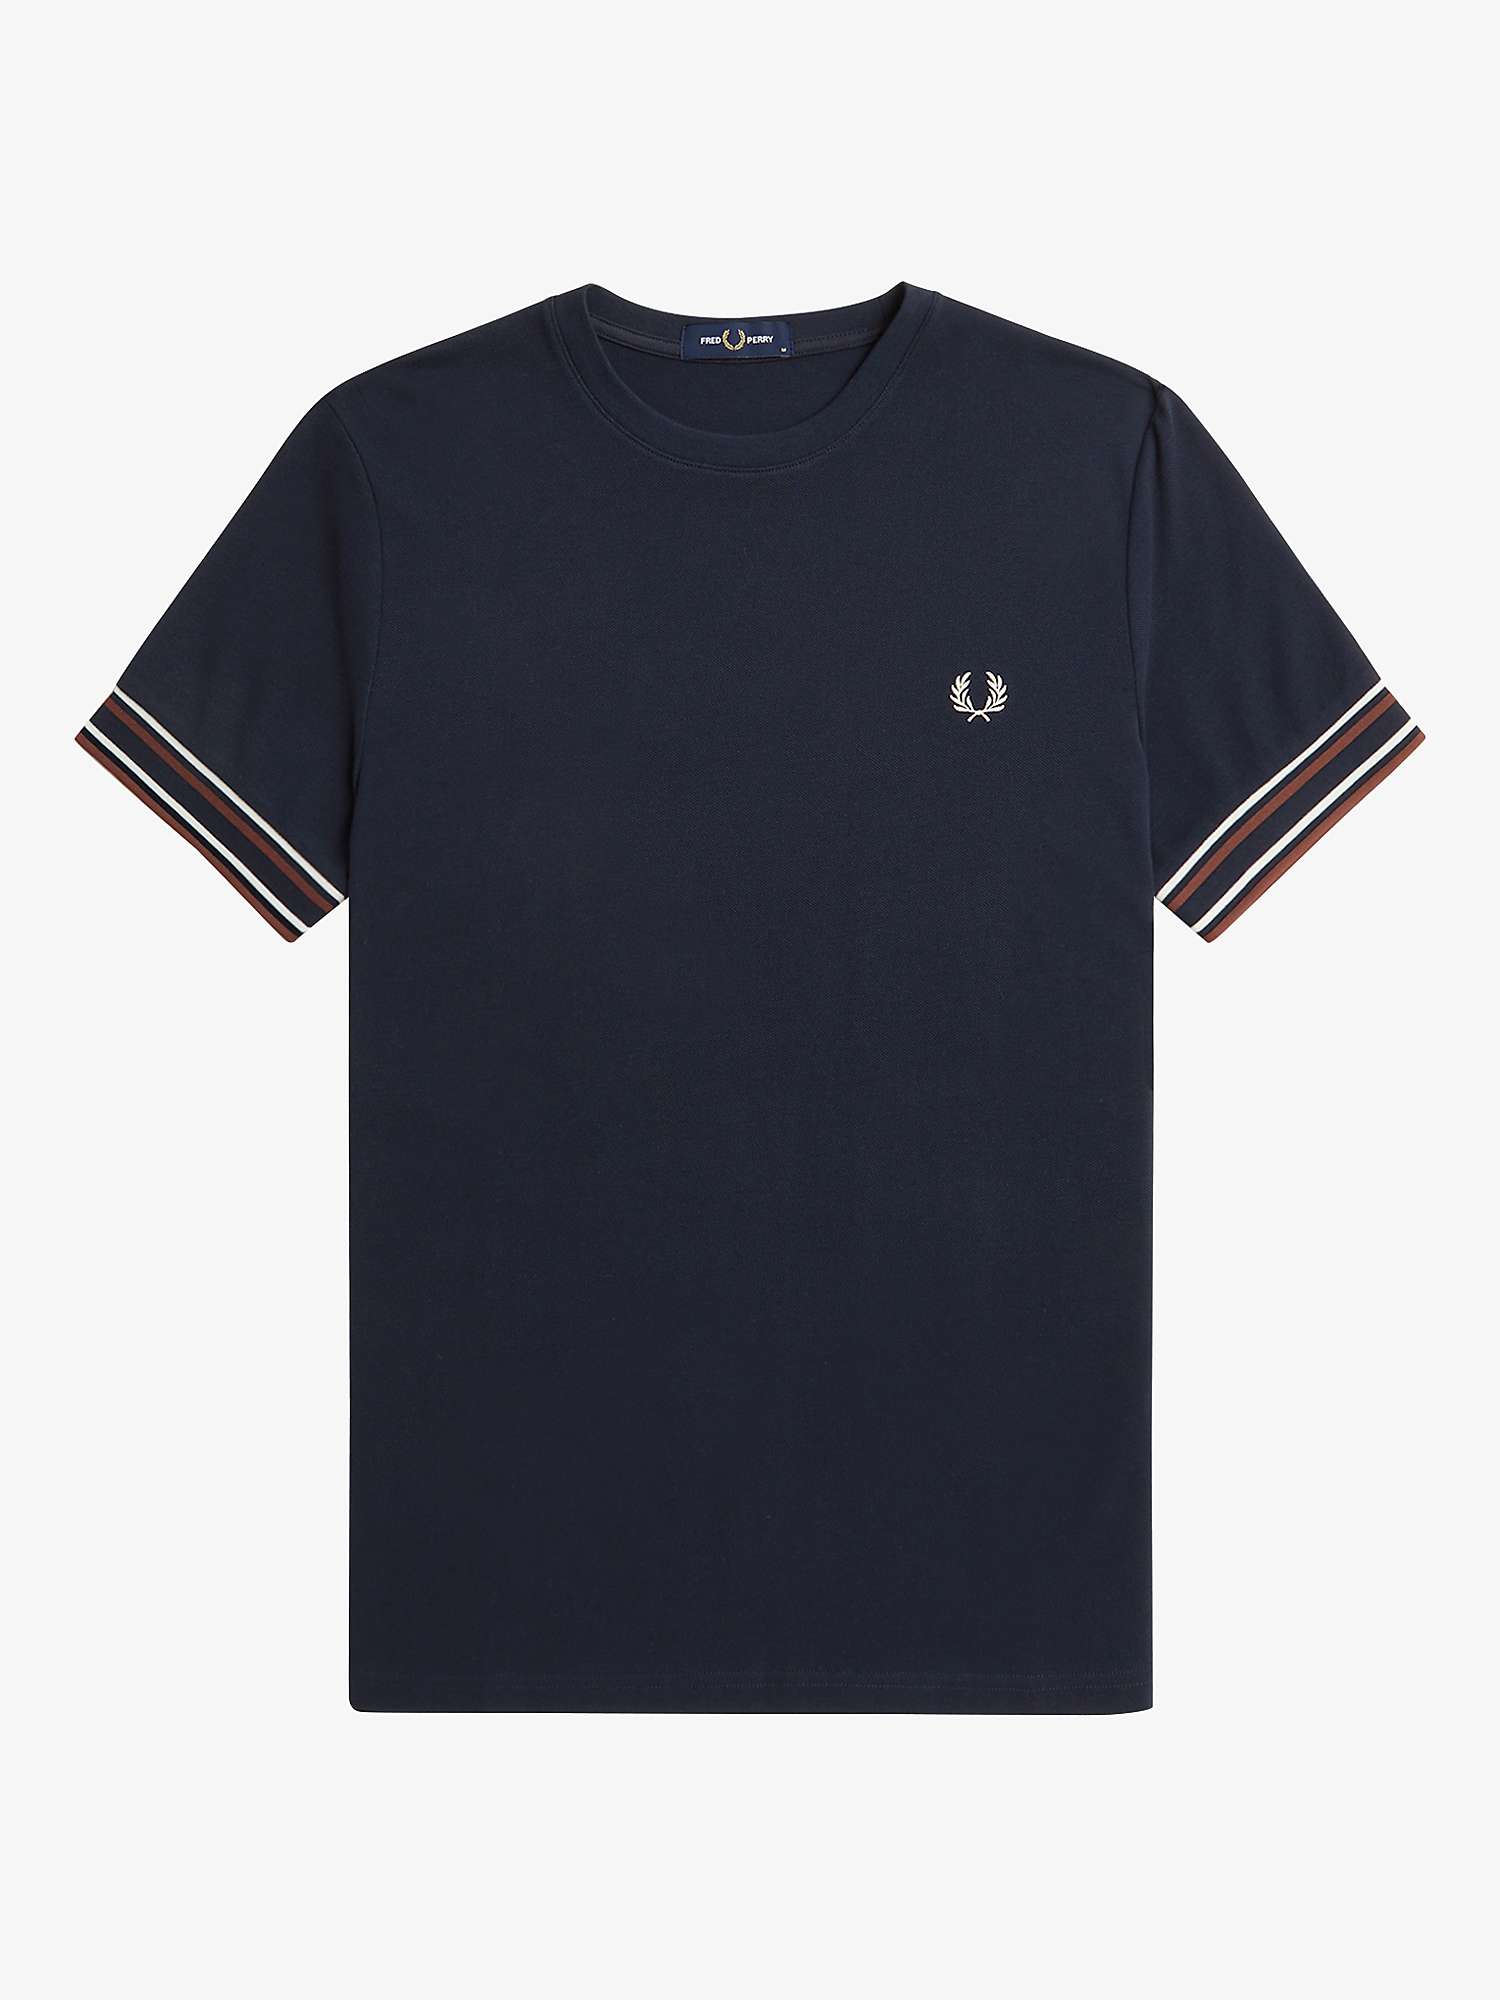 Buy Fred Perry Bold Tipped T-Shirt, Navy Online at johnlewis.com